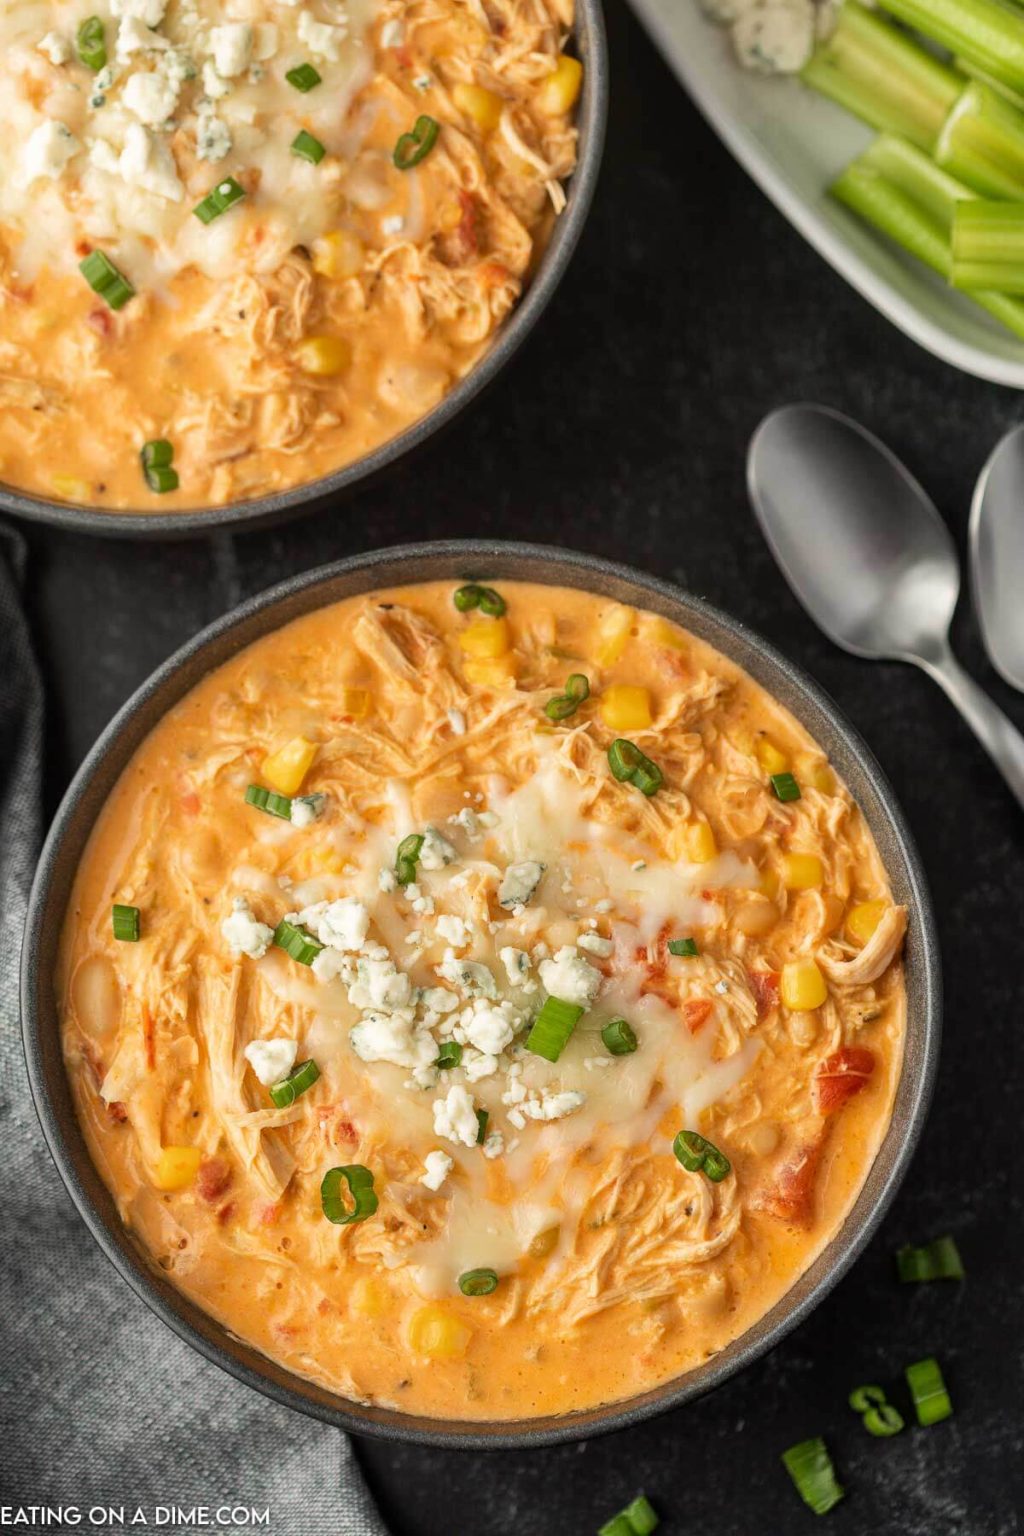 Instant Pot Buffalo Chicken Chili Recipe - Eating on a Dime